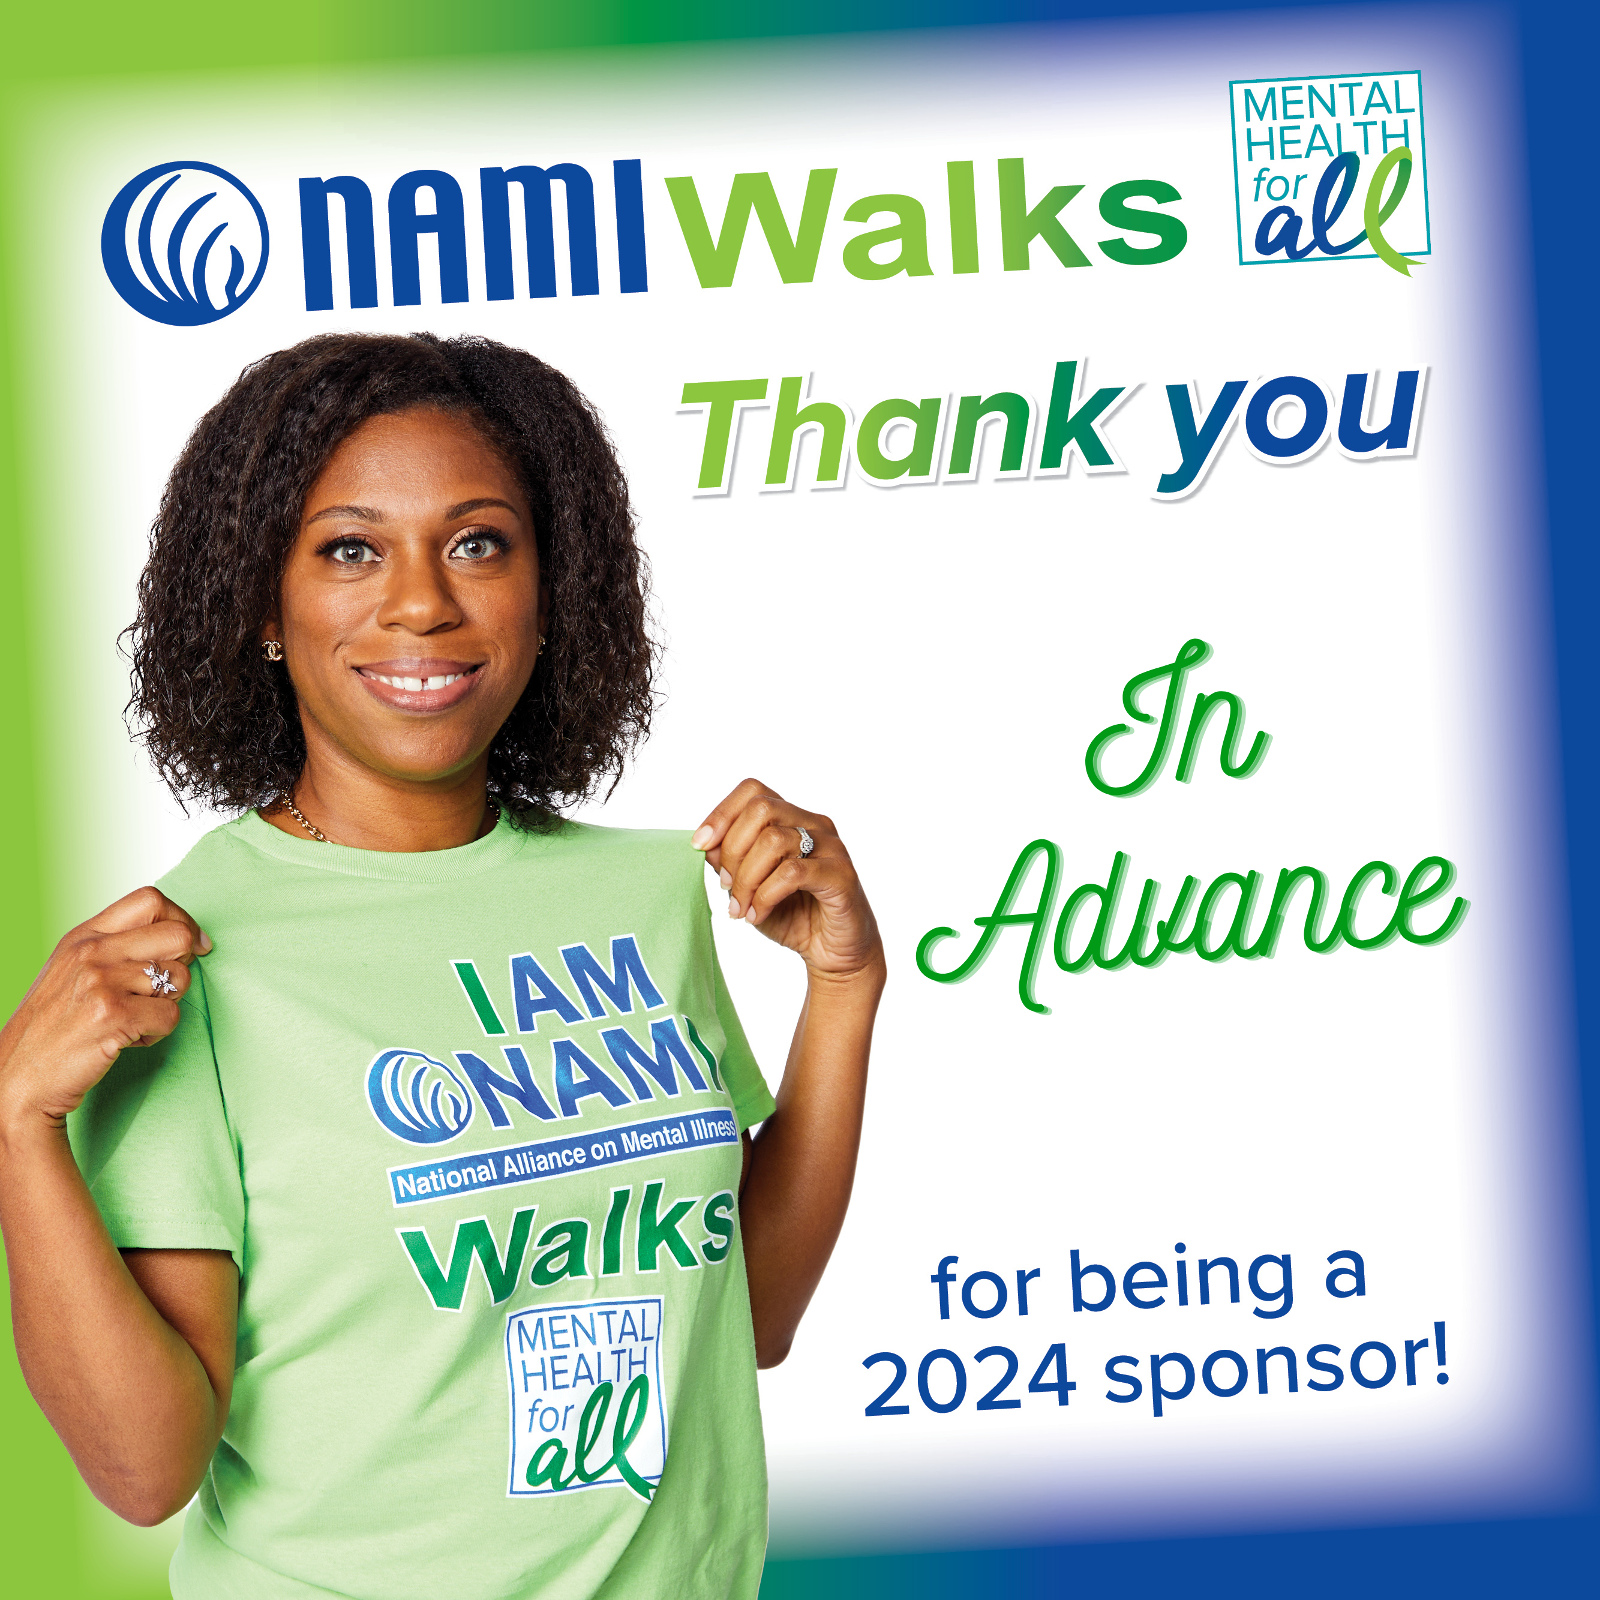 graphic with woman wearing "I am NAMIWalks T-shirt" and caption "Thank you in advance for being a 2024 sponsor."